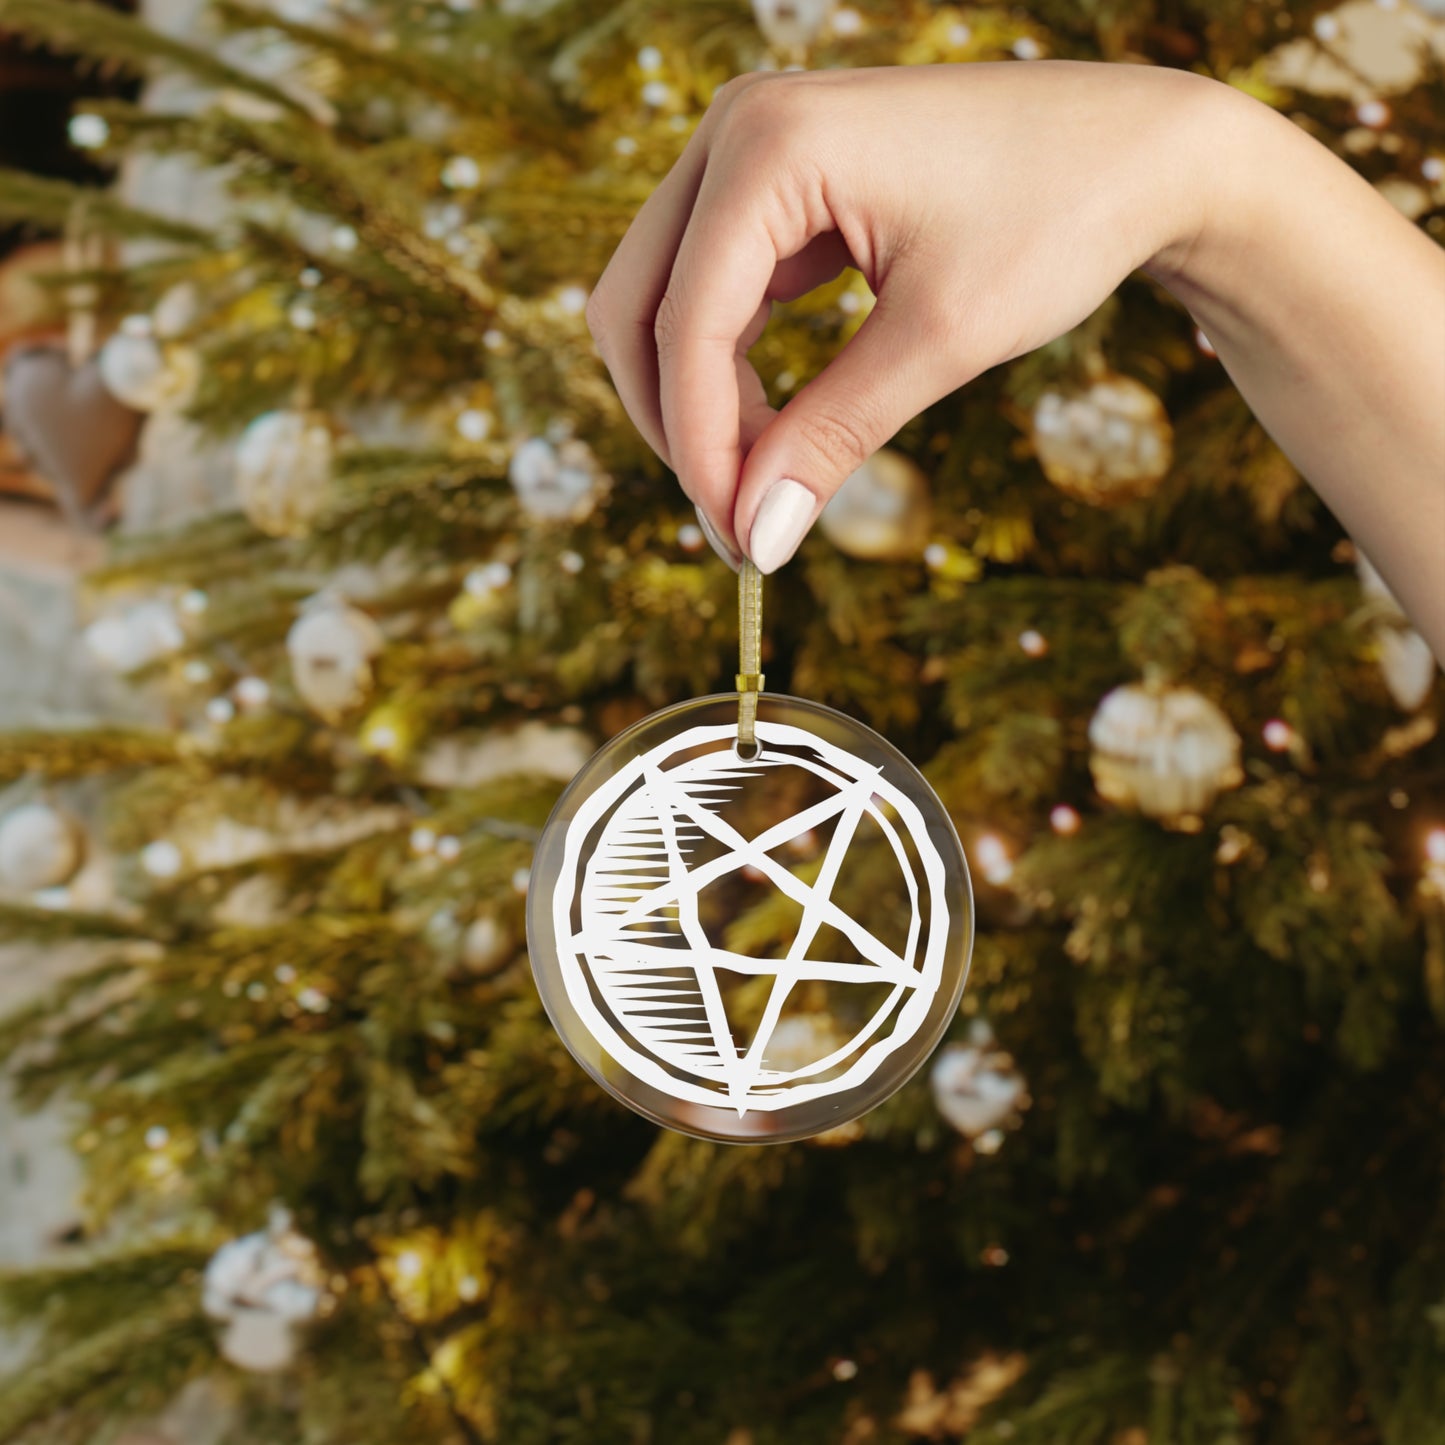 Inverted Pentagram Ornament - Yule Ornament - Christmas Ornament - Ornament for Tree Winter Solstice - Pagan, Witch, Witchcraft